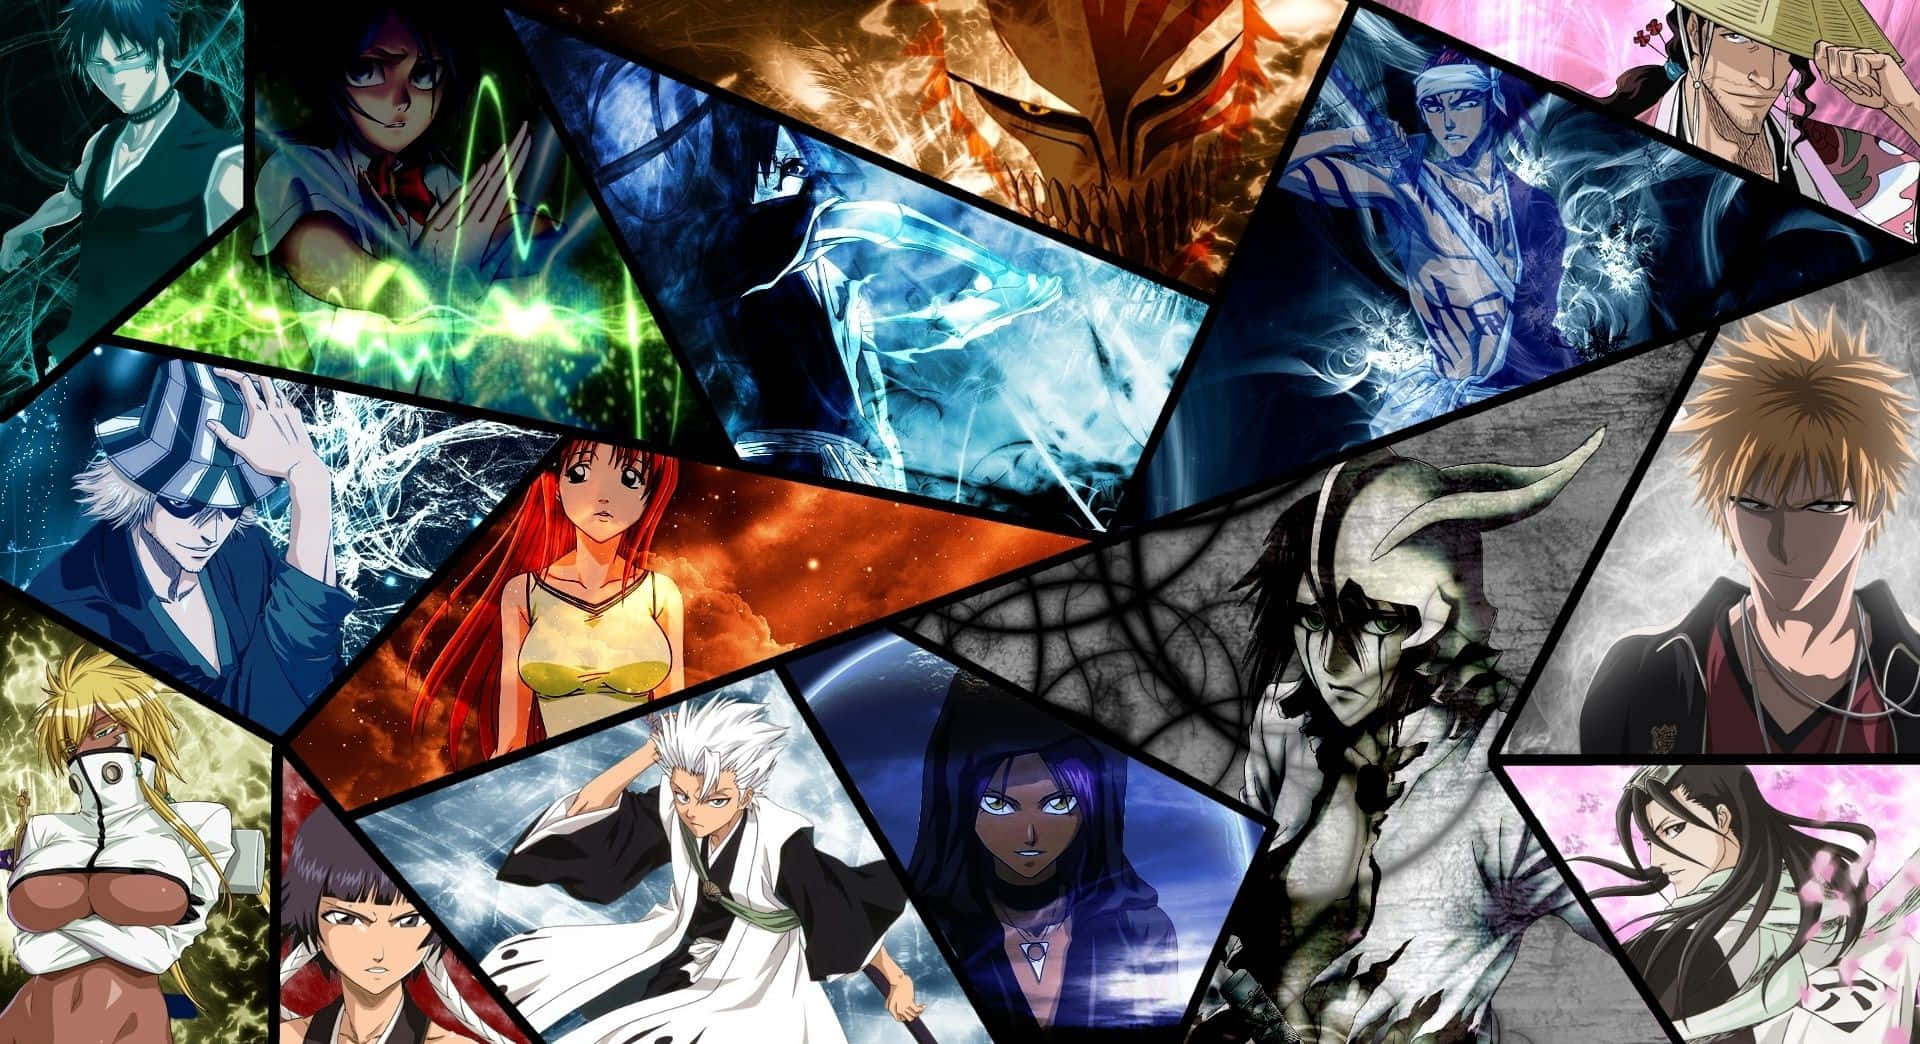 Experience Epic Fantasy Battles with the Iconic Anime Series, Bleach